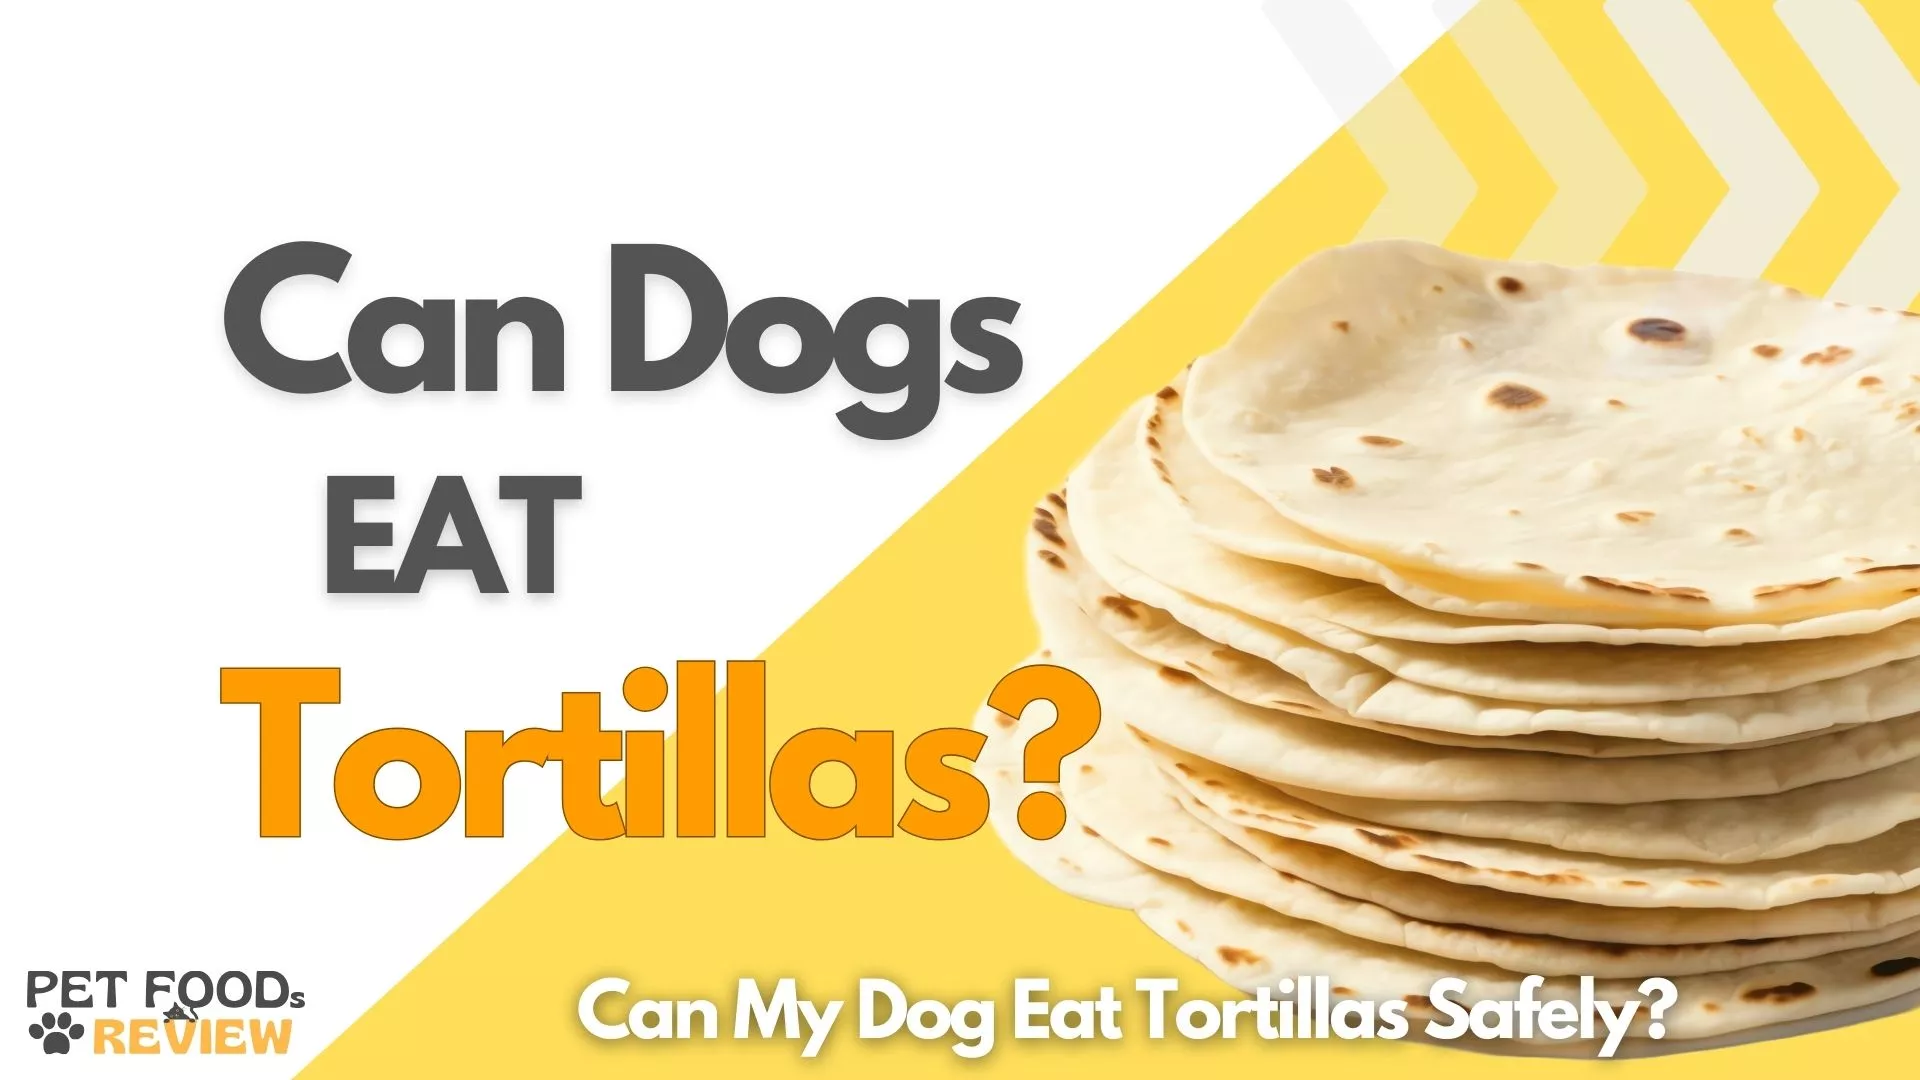 Can Dogs eat Tortillas?